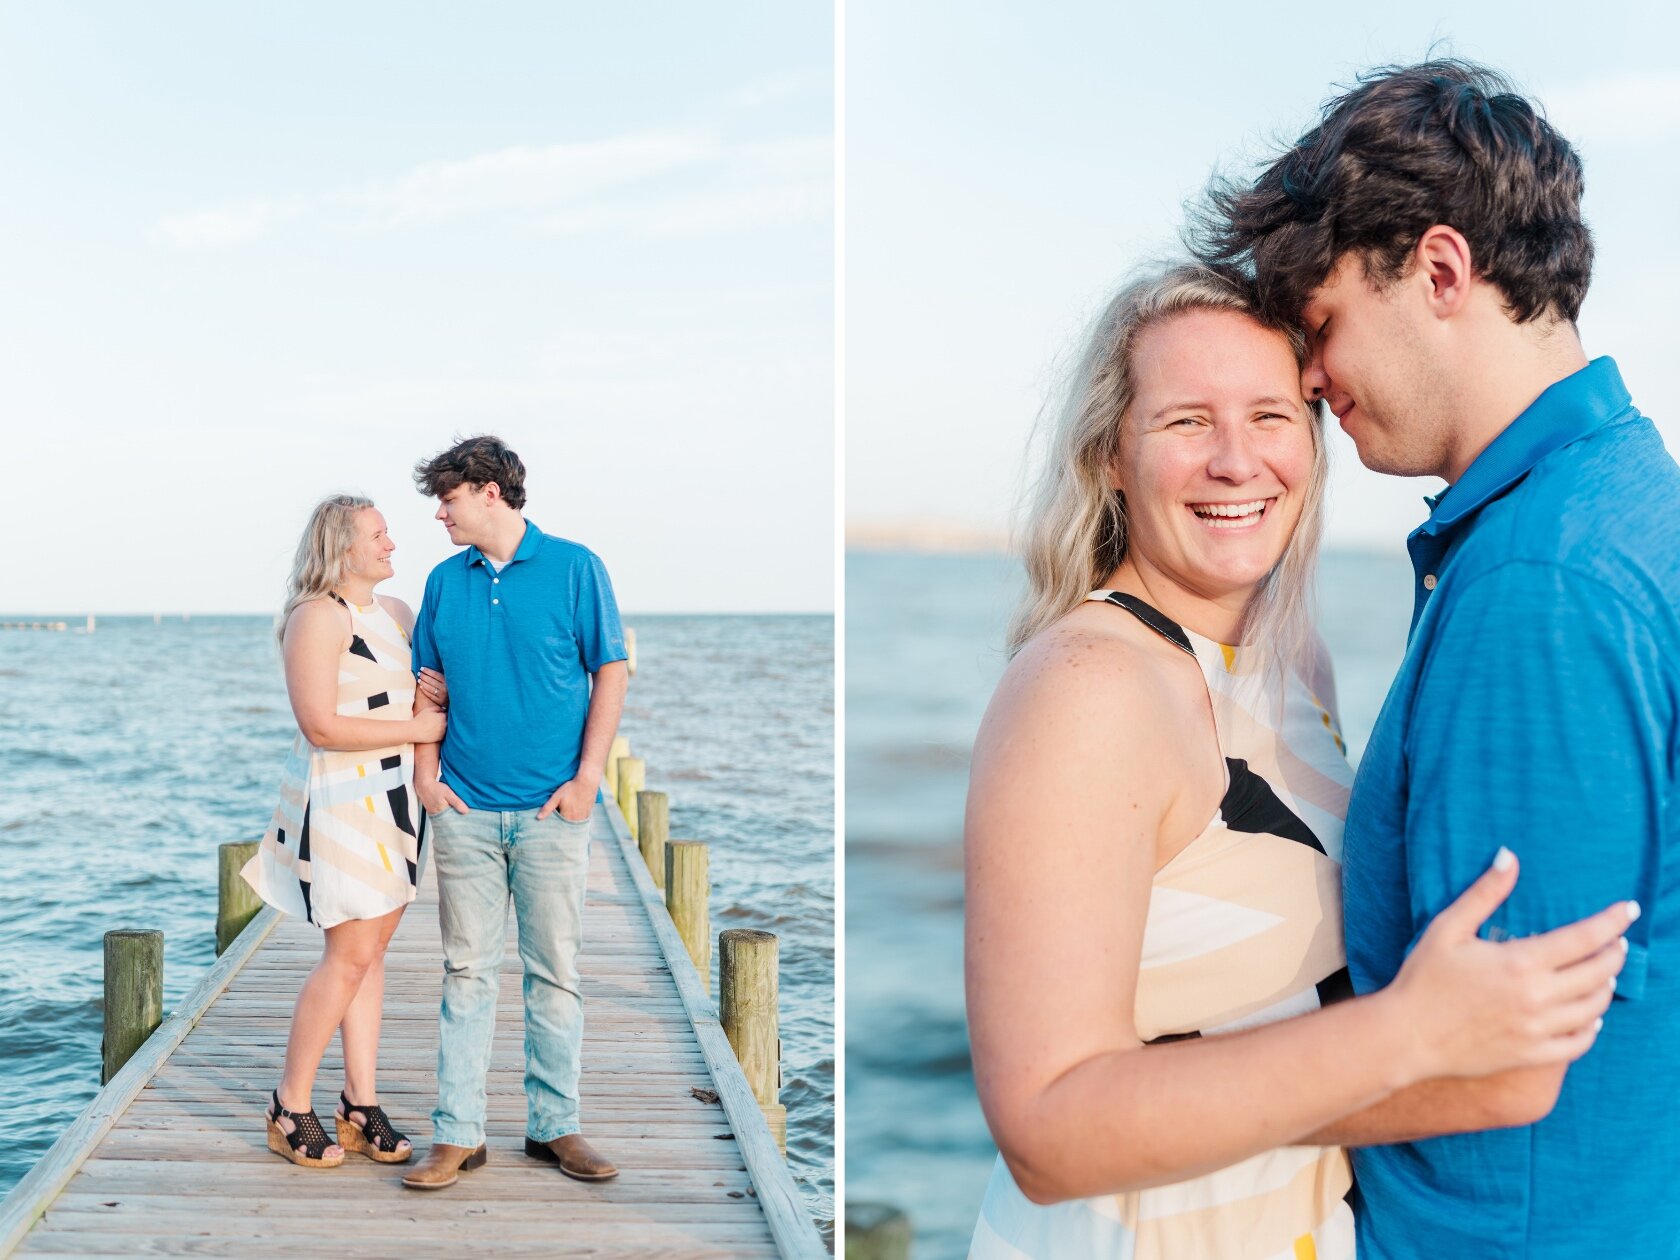 Sunrise Engagement Portrait Session at the Fairhope Pier in August Photographed by Kristen Marcus Photography